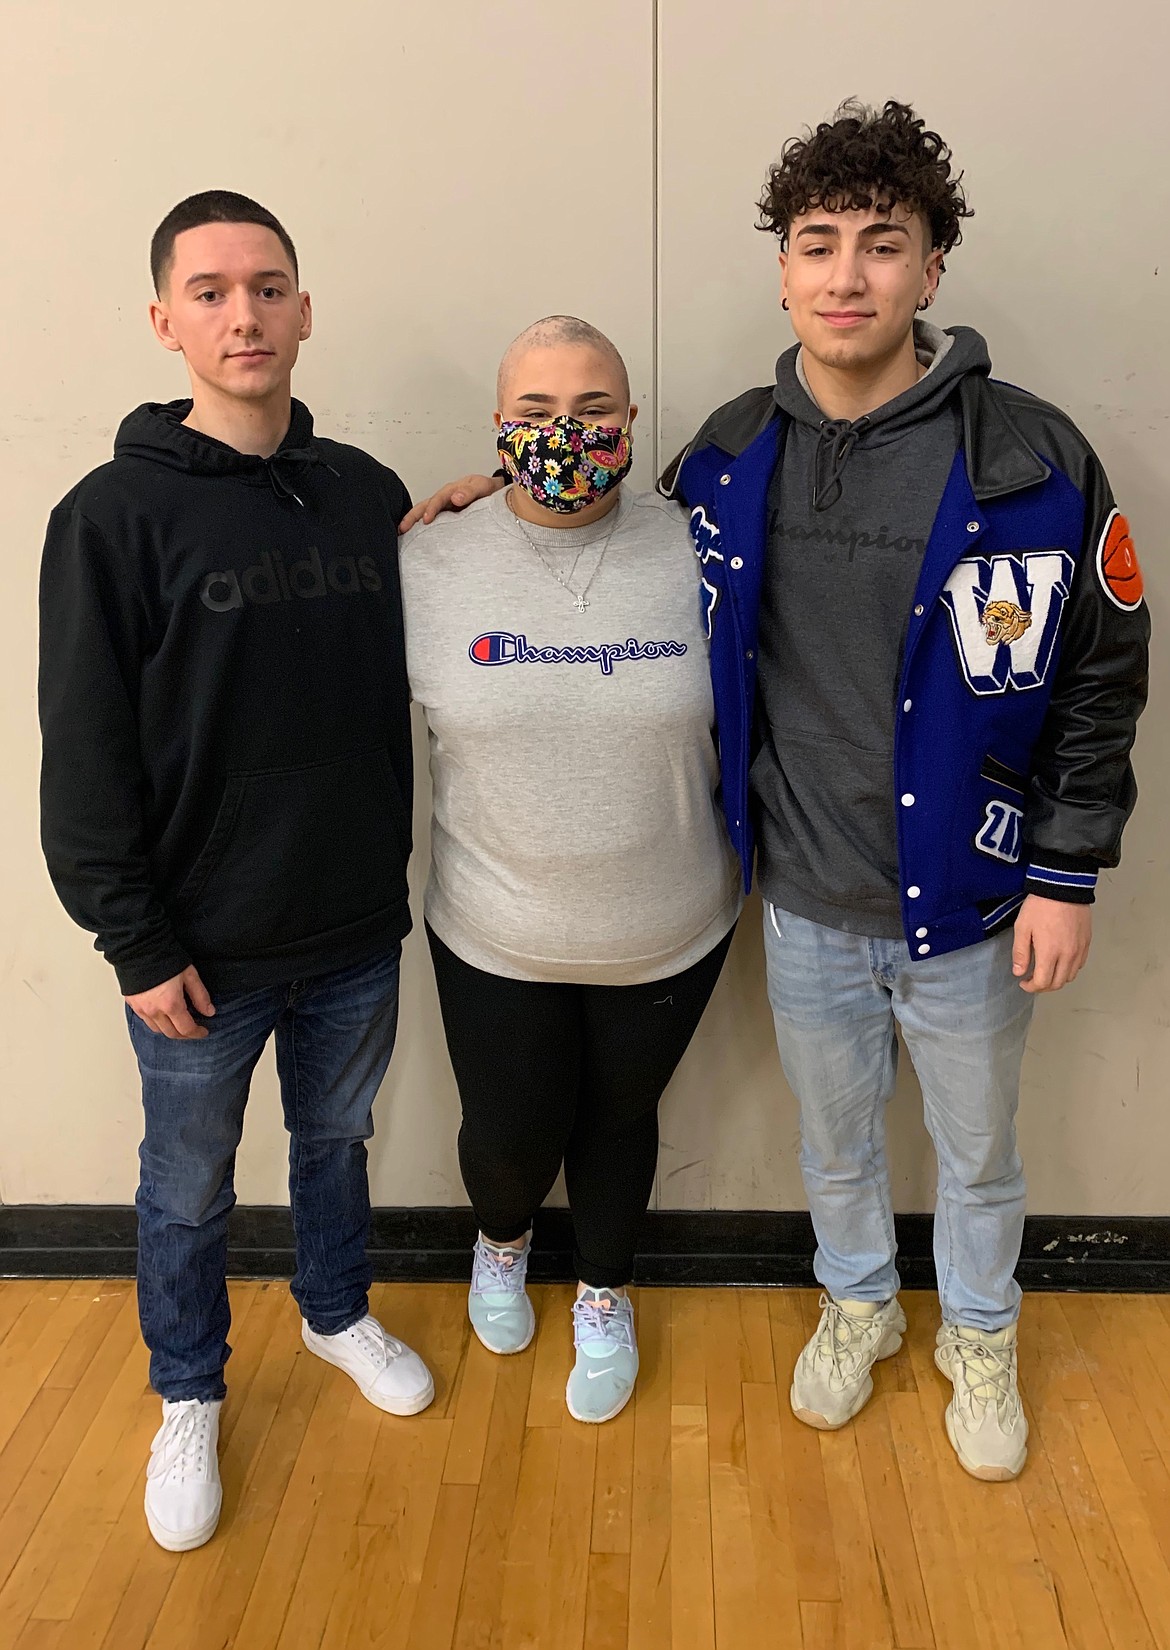 Tyson Wall, Avree Pruneda and Ayzaiah Pruneda at Warden High School. Avree Pruneda must wear a mask now to prevent her from getting sick as she begins chemotherapy.